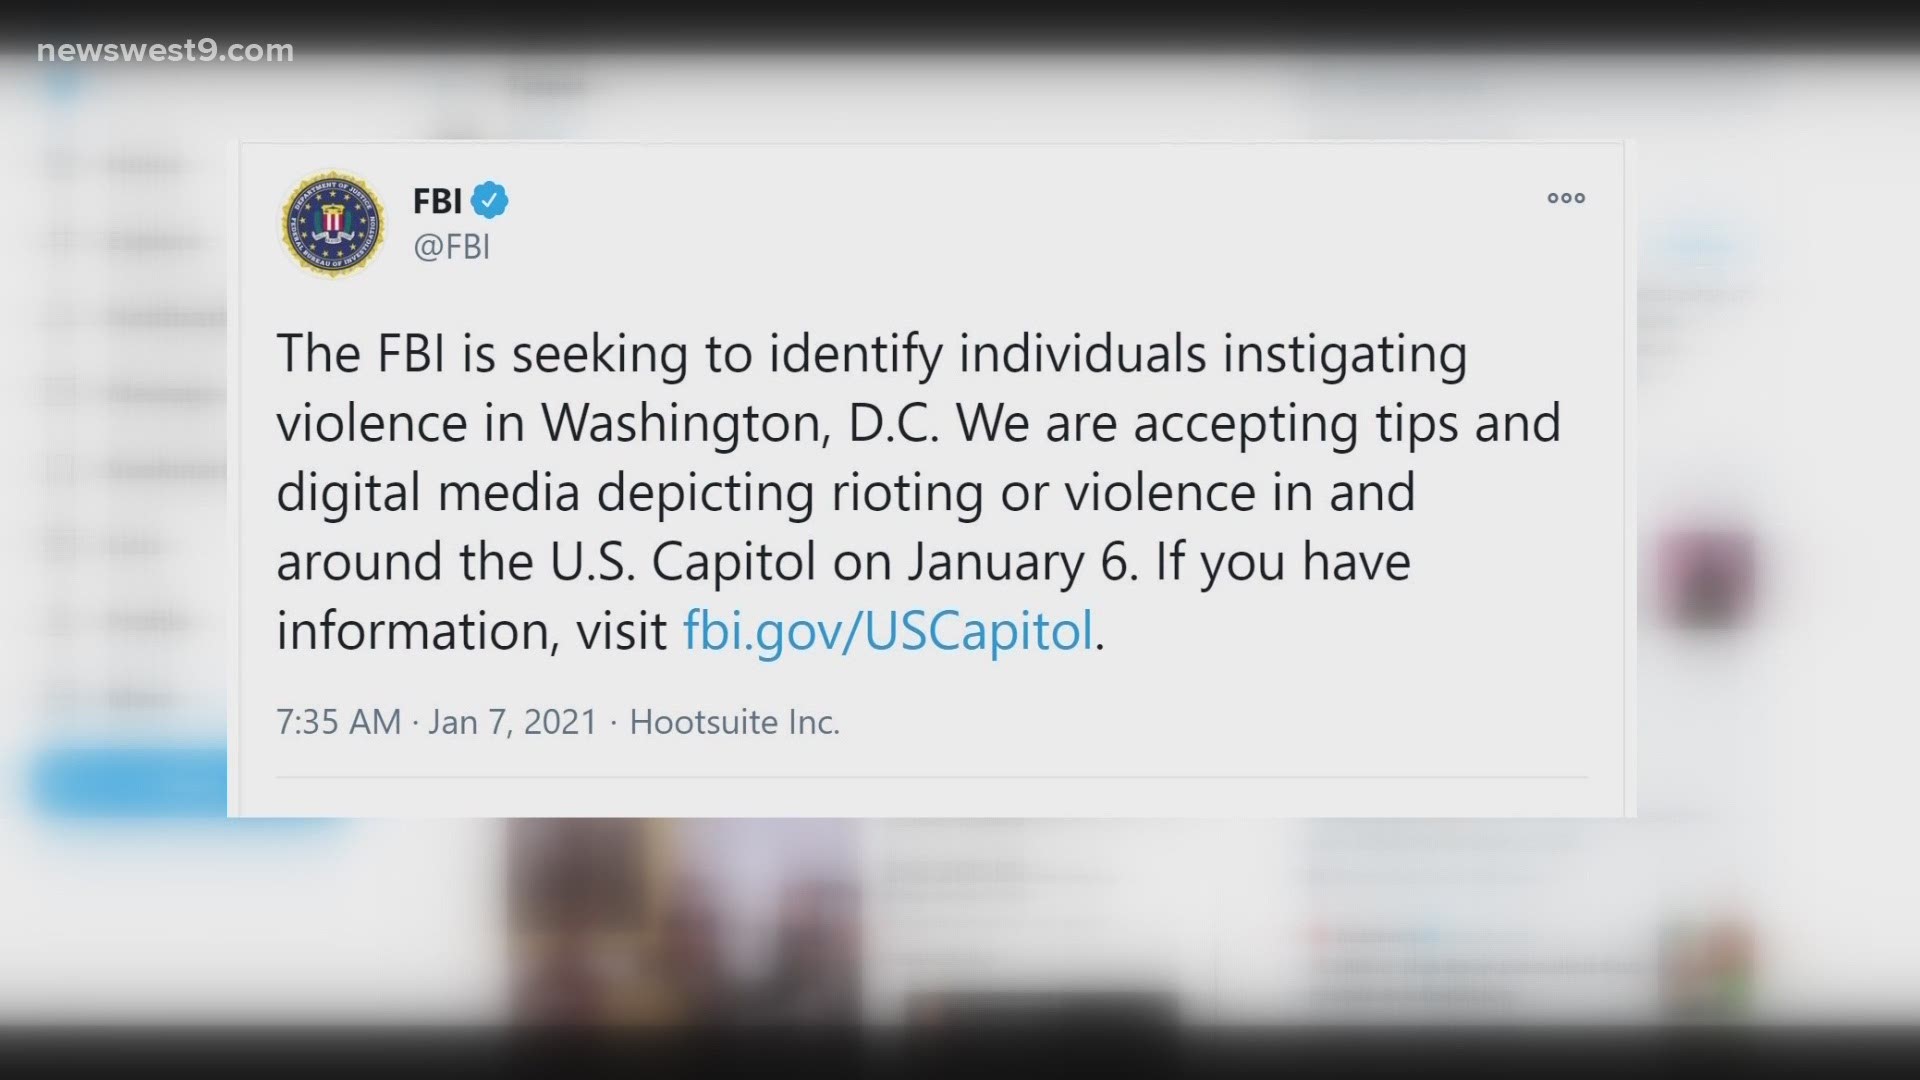 The FBI is accepting tips and digital media depicting rioting and violence in the U.S. Capitol and the surrounding area in Washington, DC, on Wednesday.